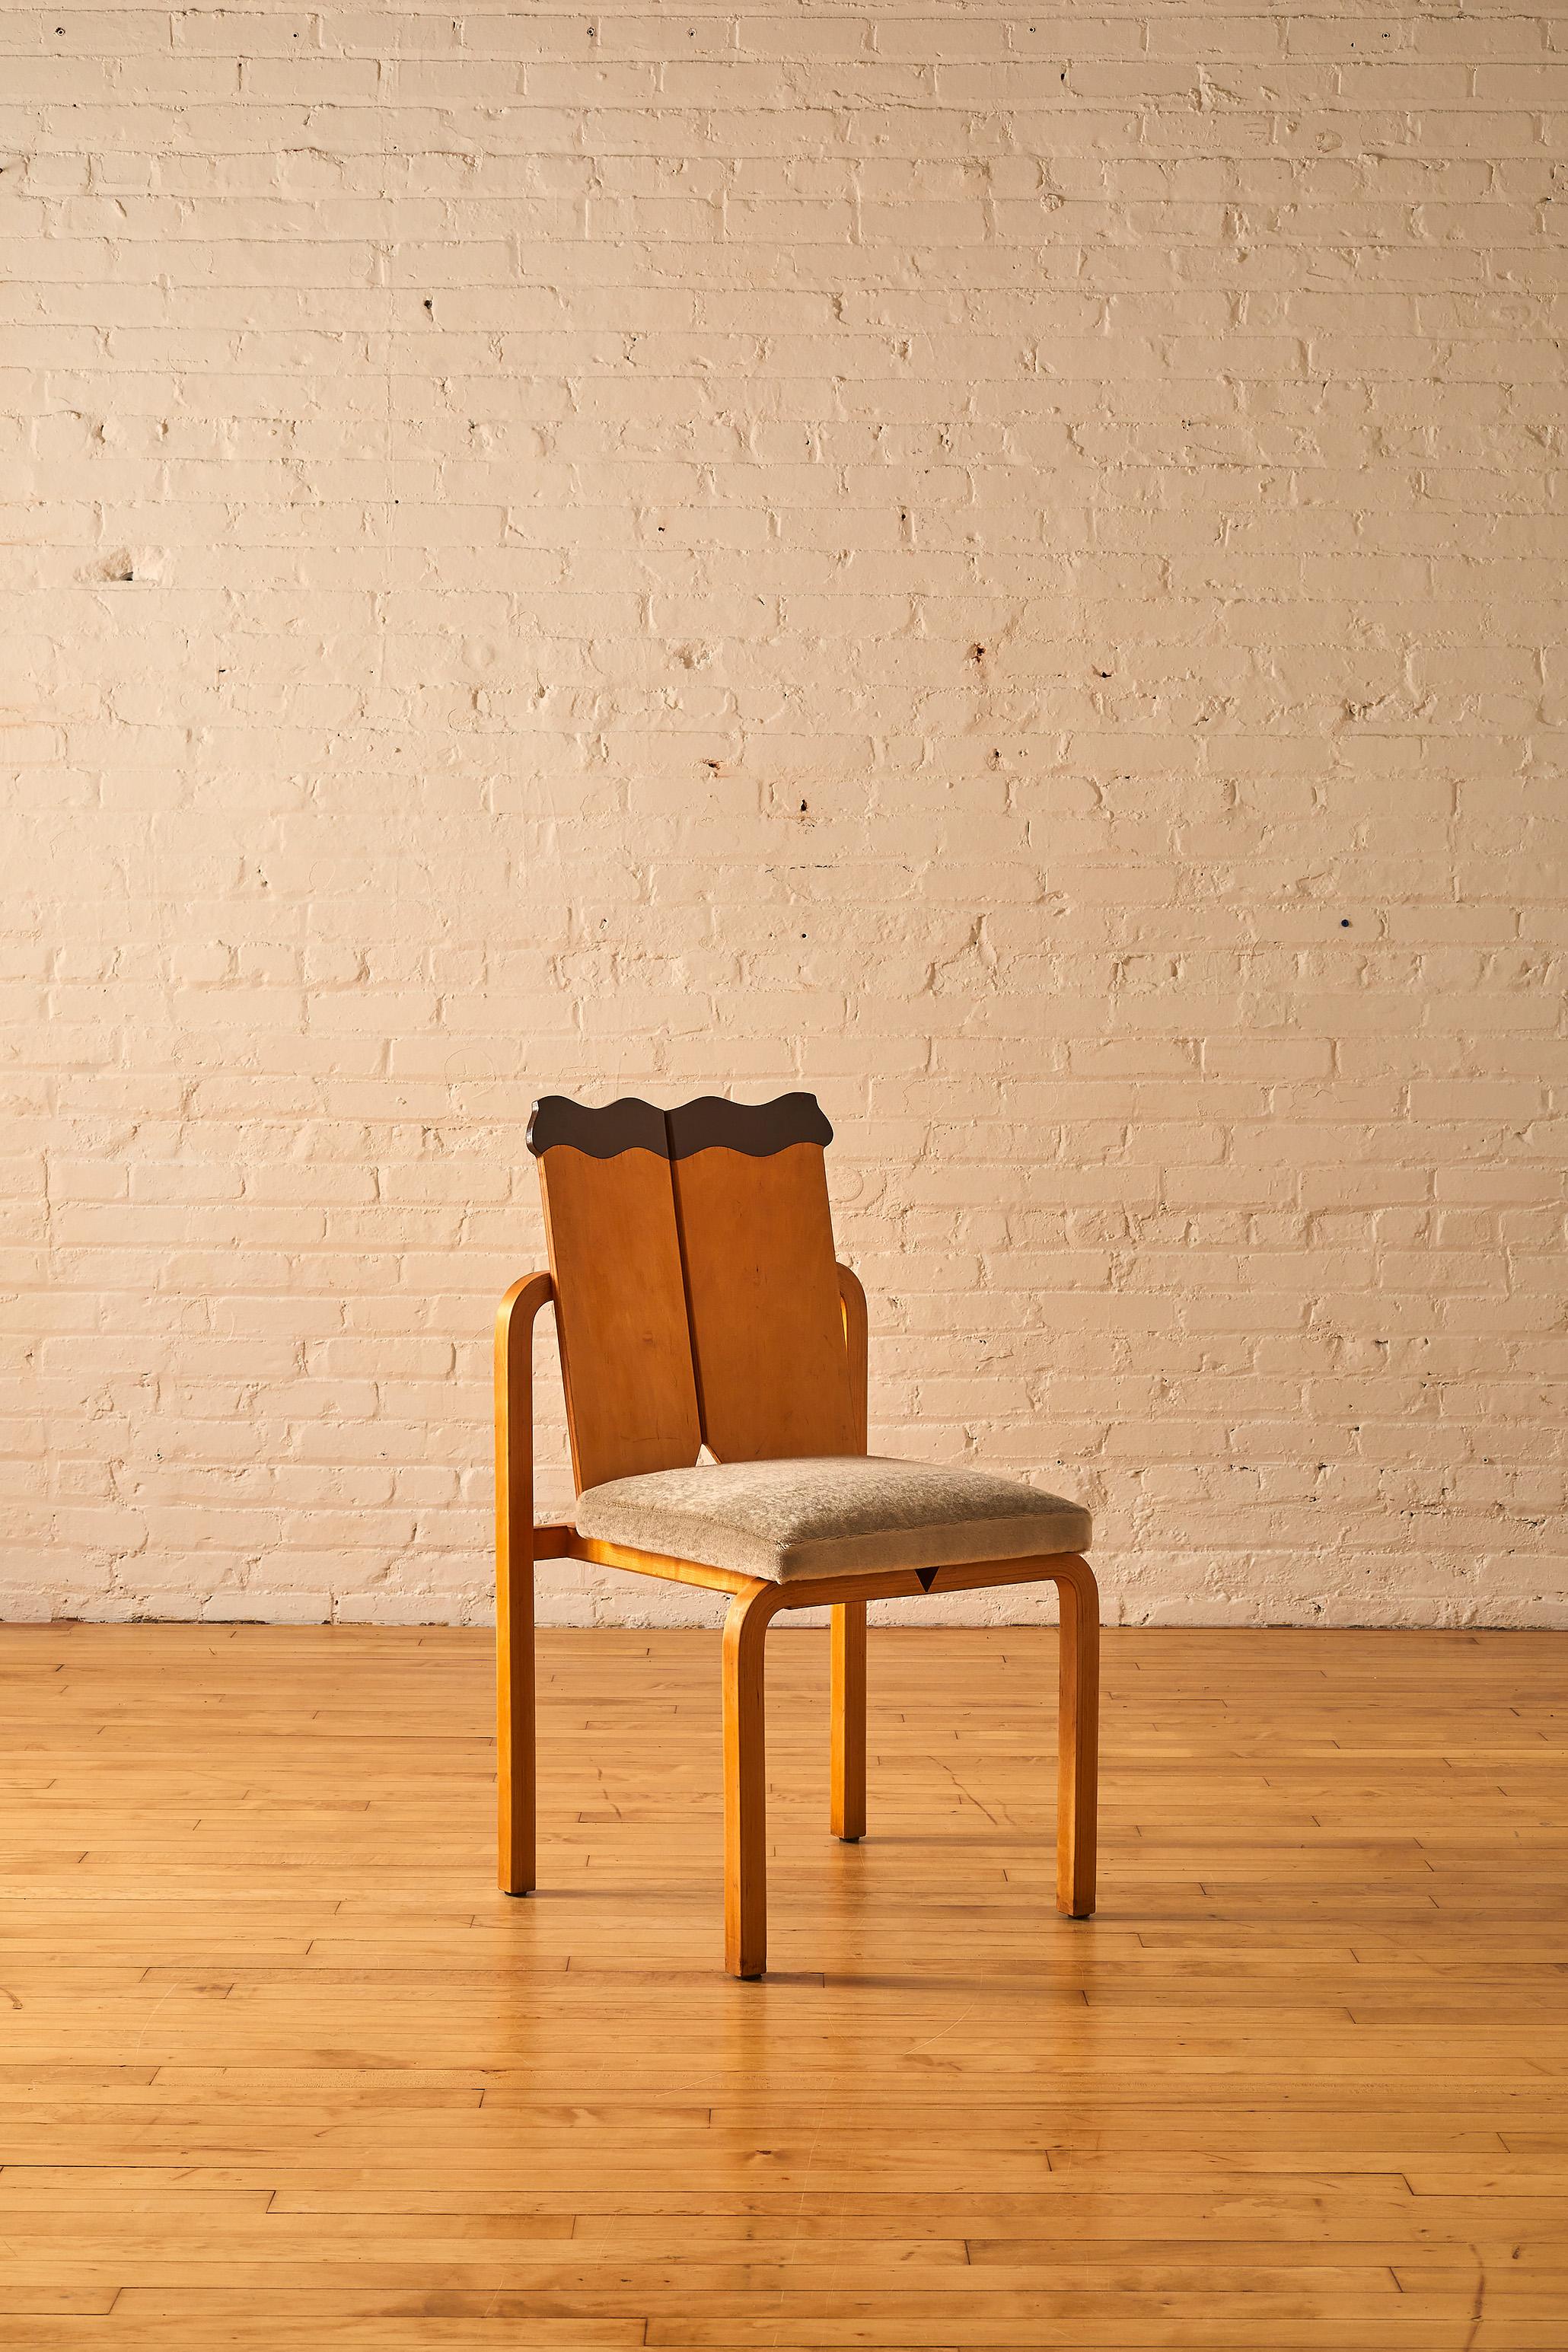 Peter Danko “Electronic Cottage” dining chairs. (Set of 6) Newly reupholstered in Mohair. 

About Peter Danko:
Peter Danko Designed the chairs for the Electronic Cottage. The design adopts a way to use stress skin engineering to structure a